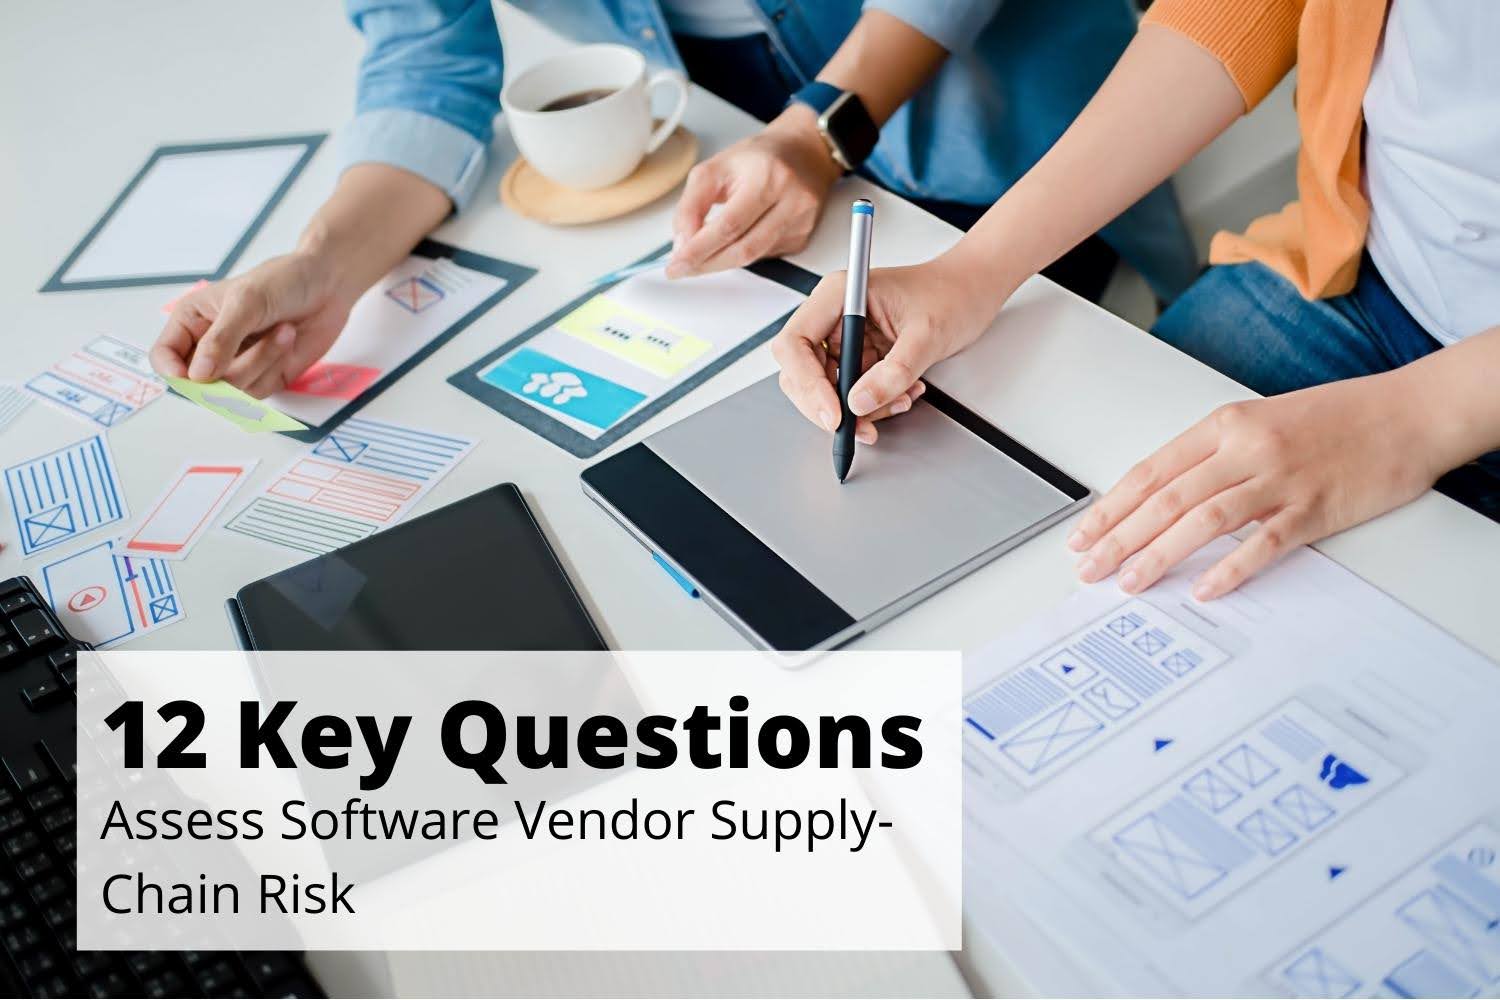 12 Key Questions to Assess Software Vendor Supply-Chain Risk